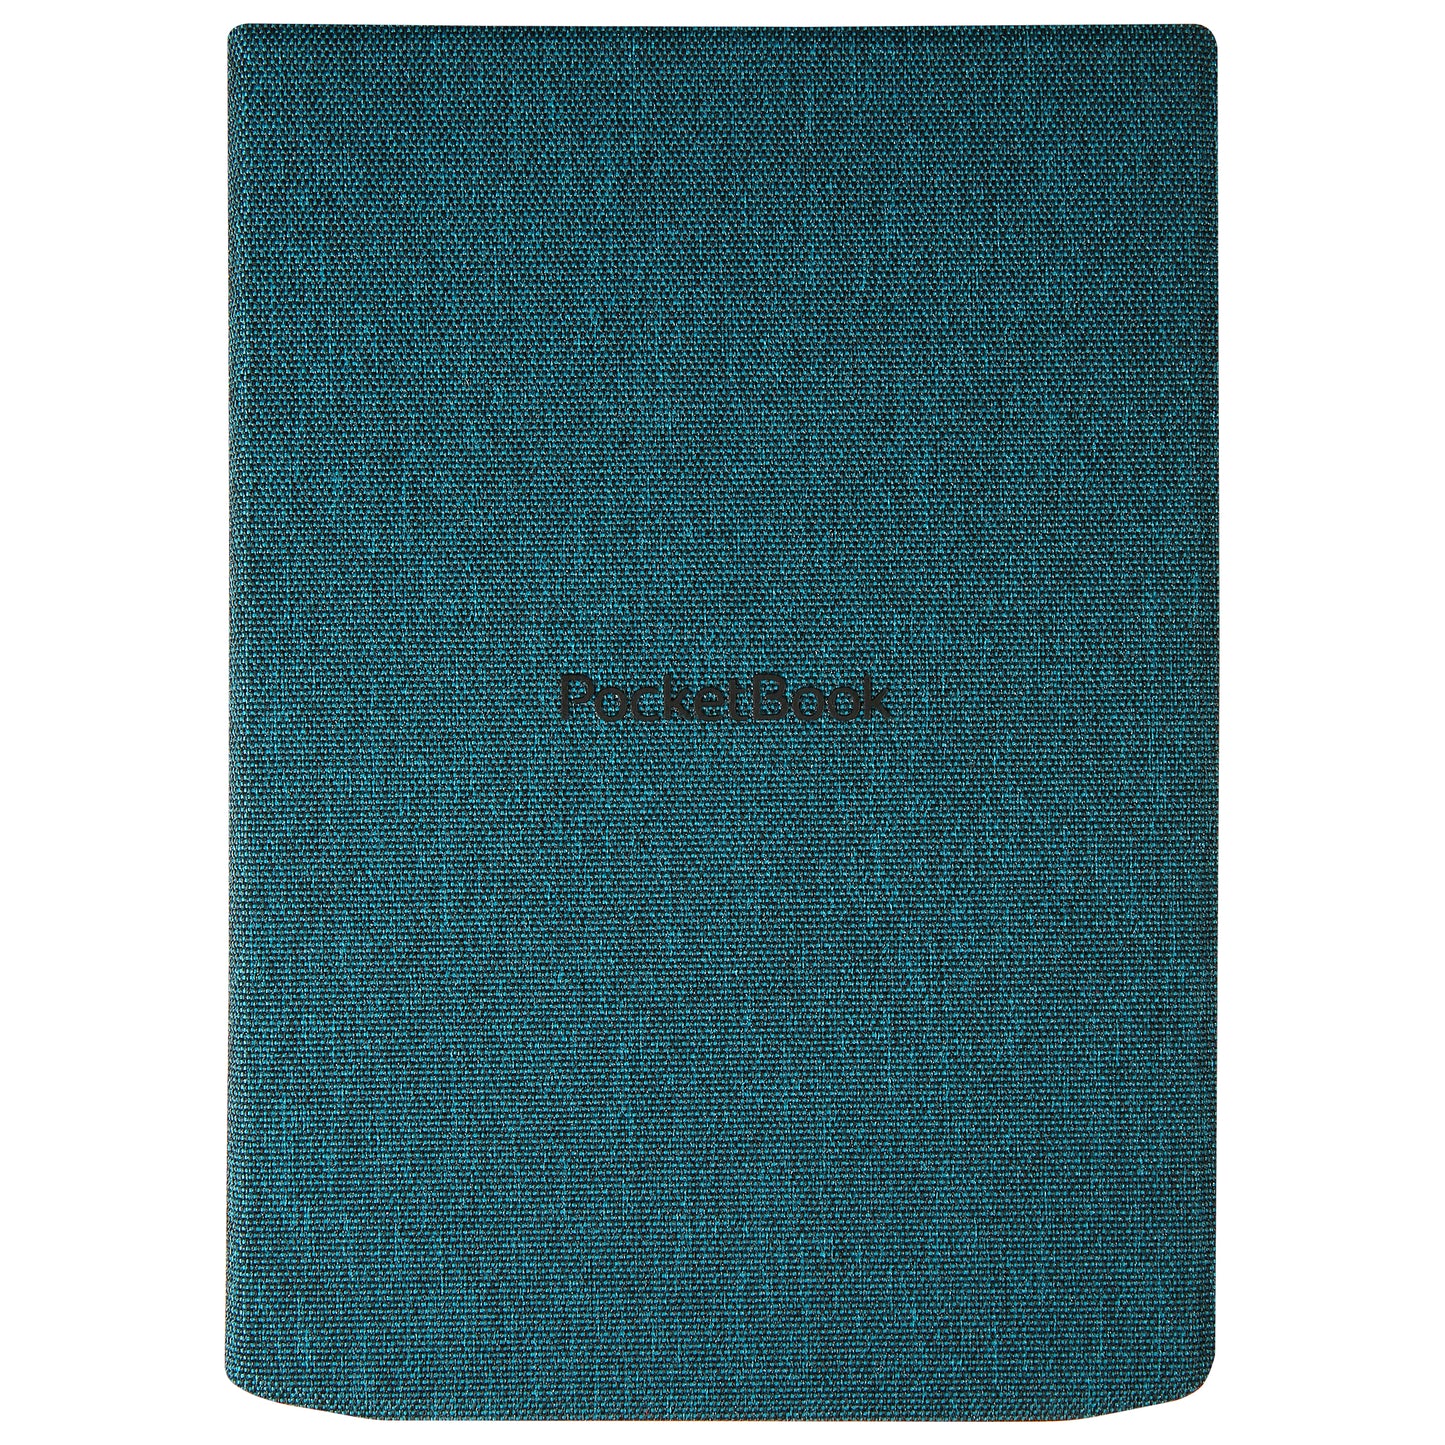 Pocketbook InkPad Color 1, 2,3, cases